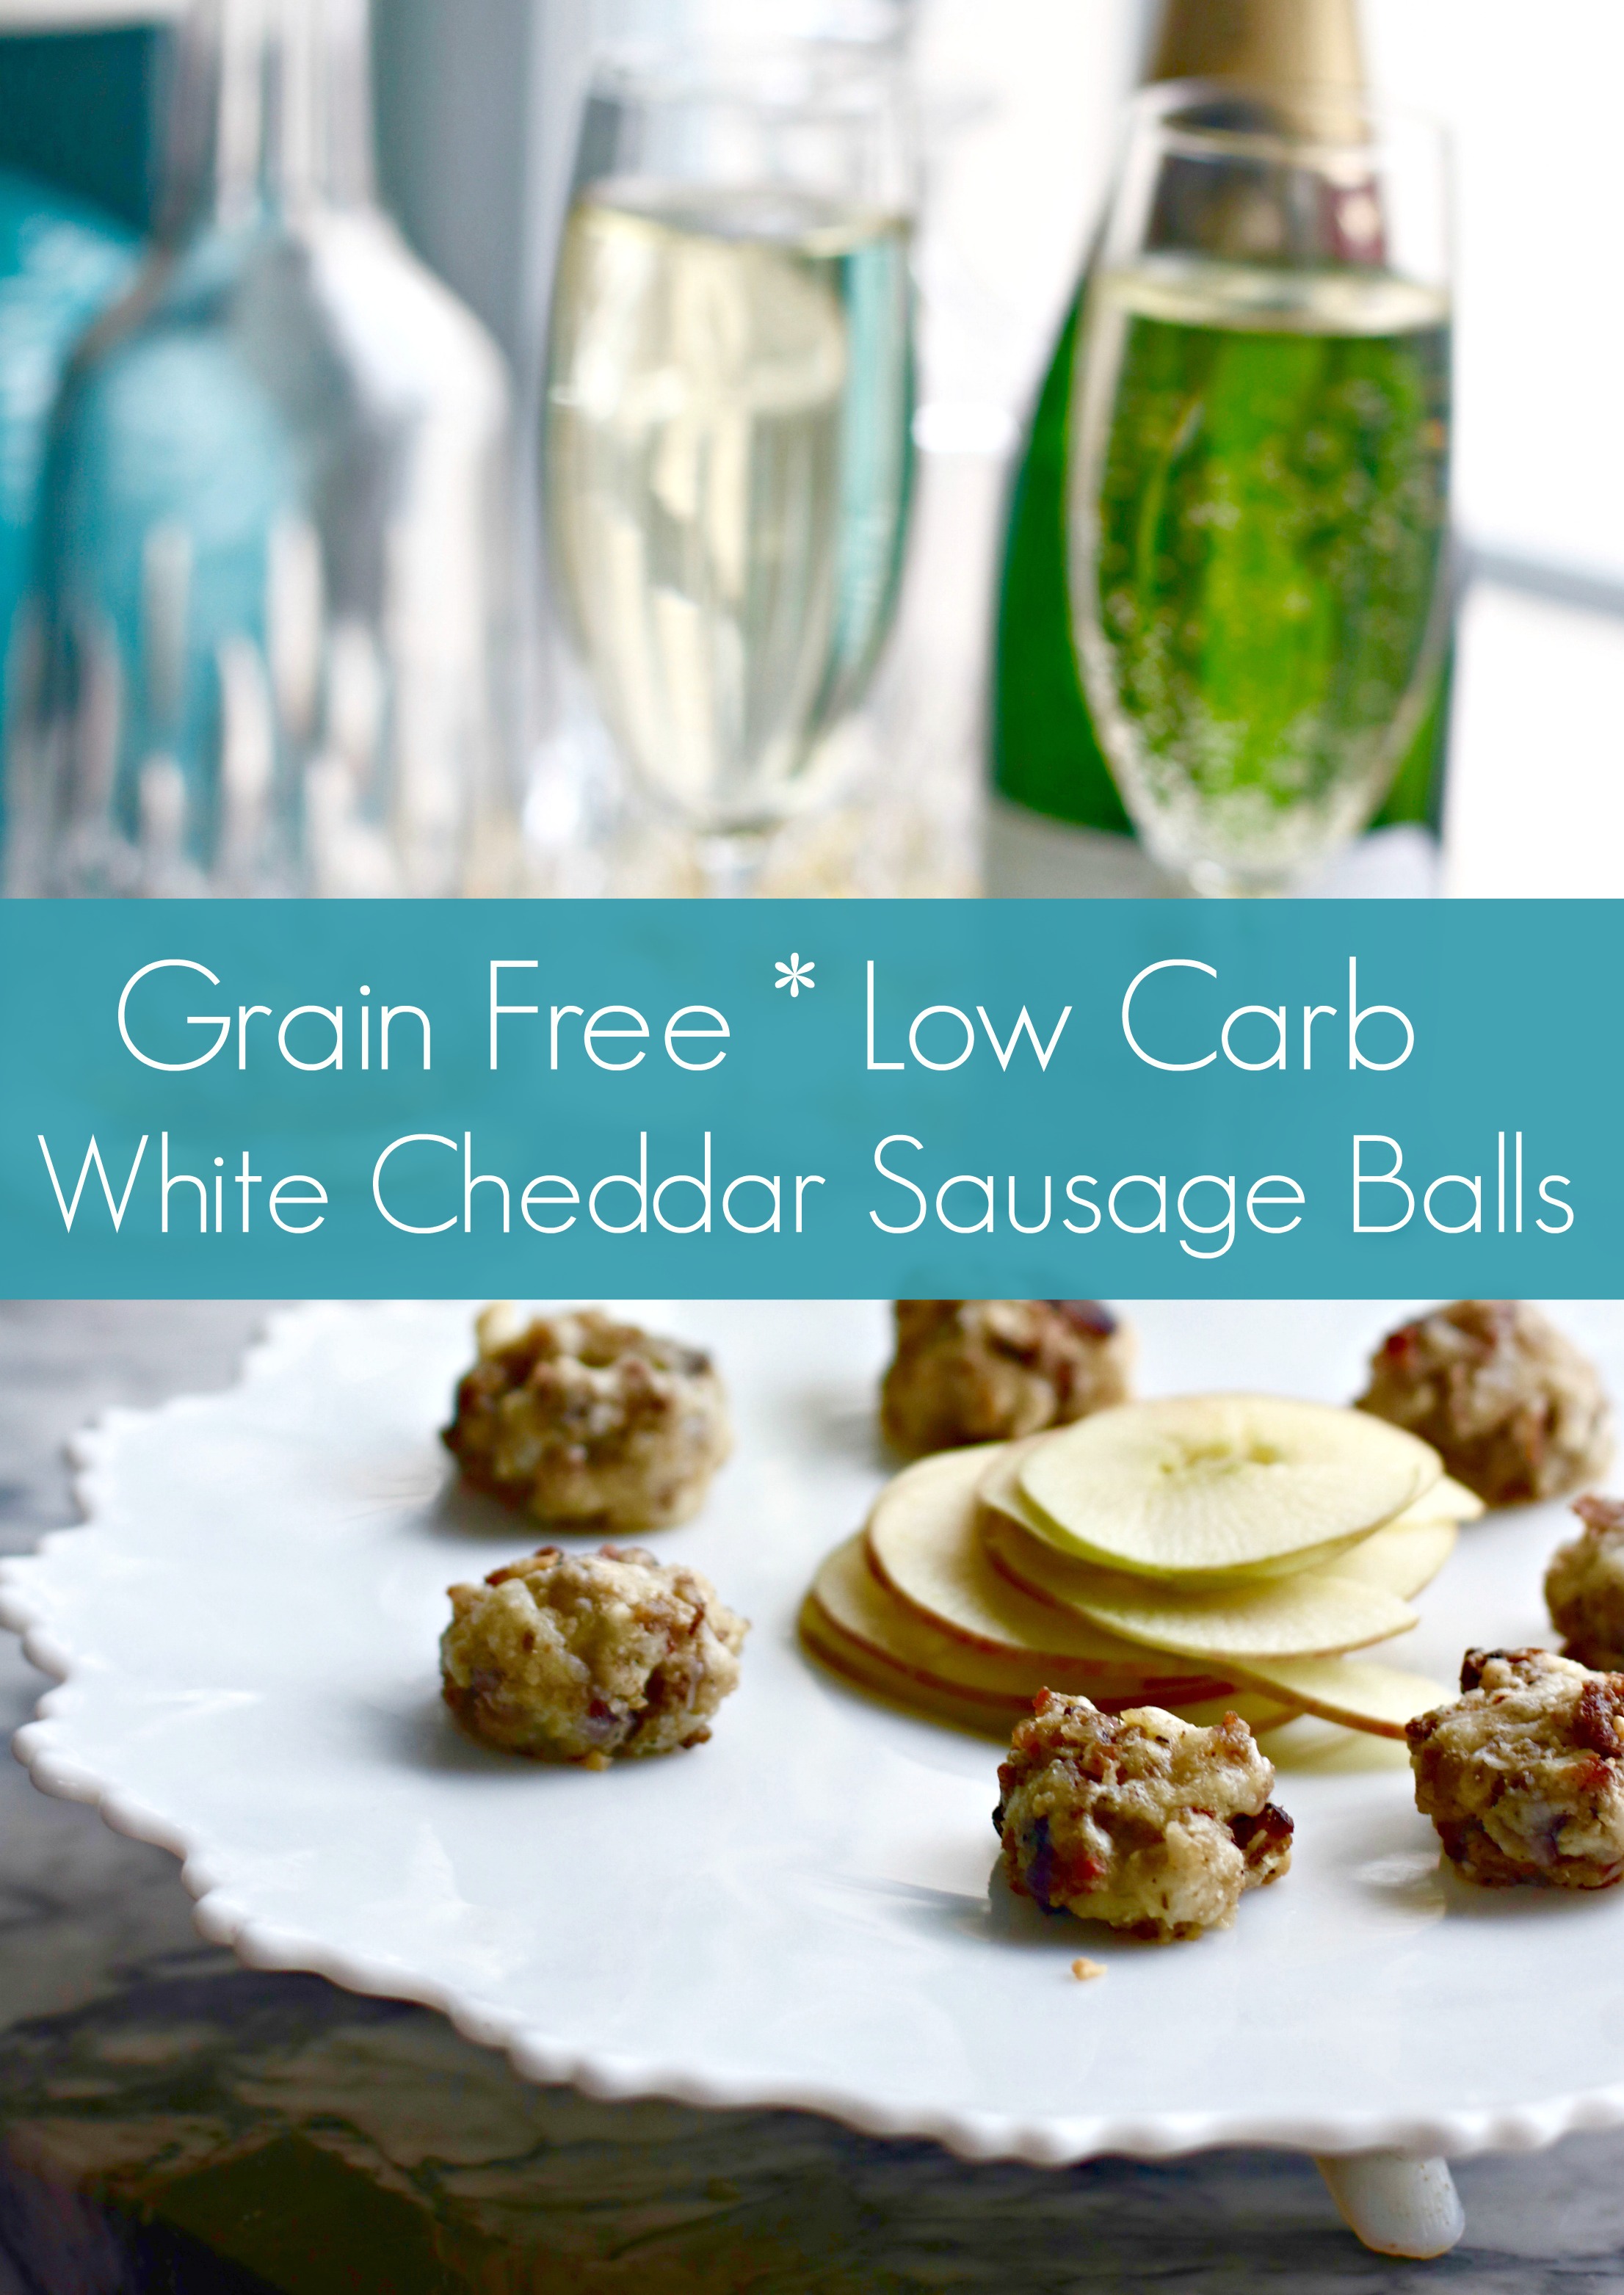 Grain Free White Cheddar Easy Sausage Balls from Spinach TIger